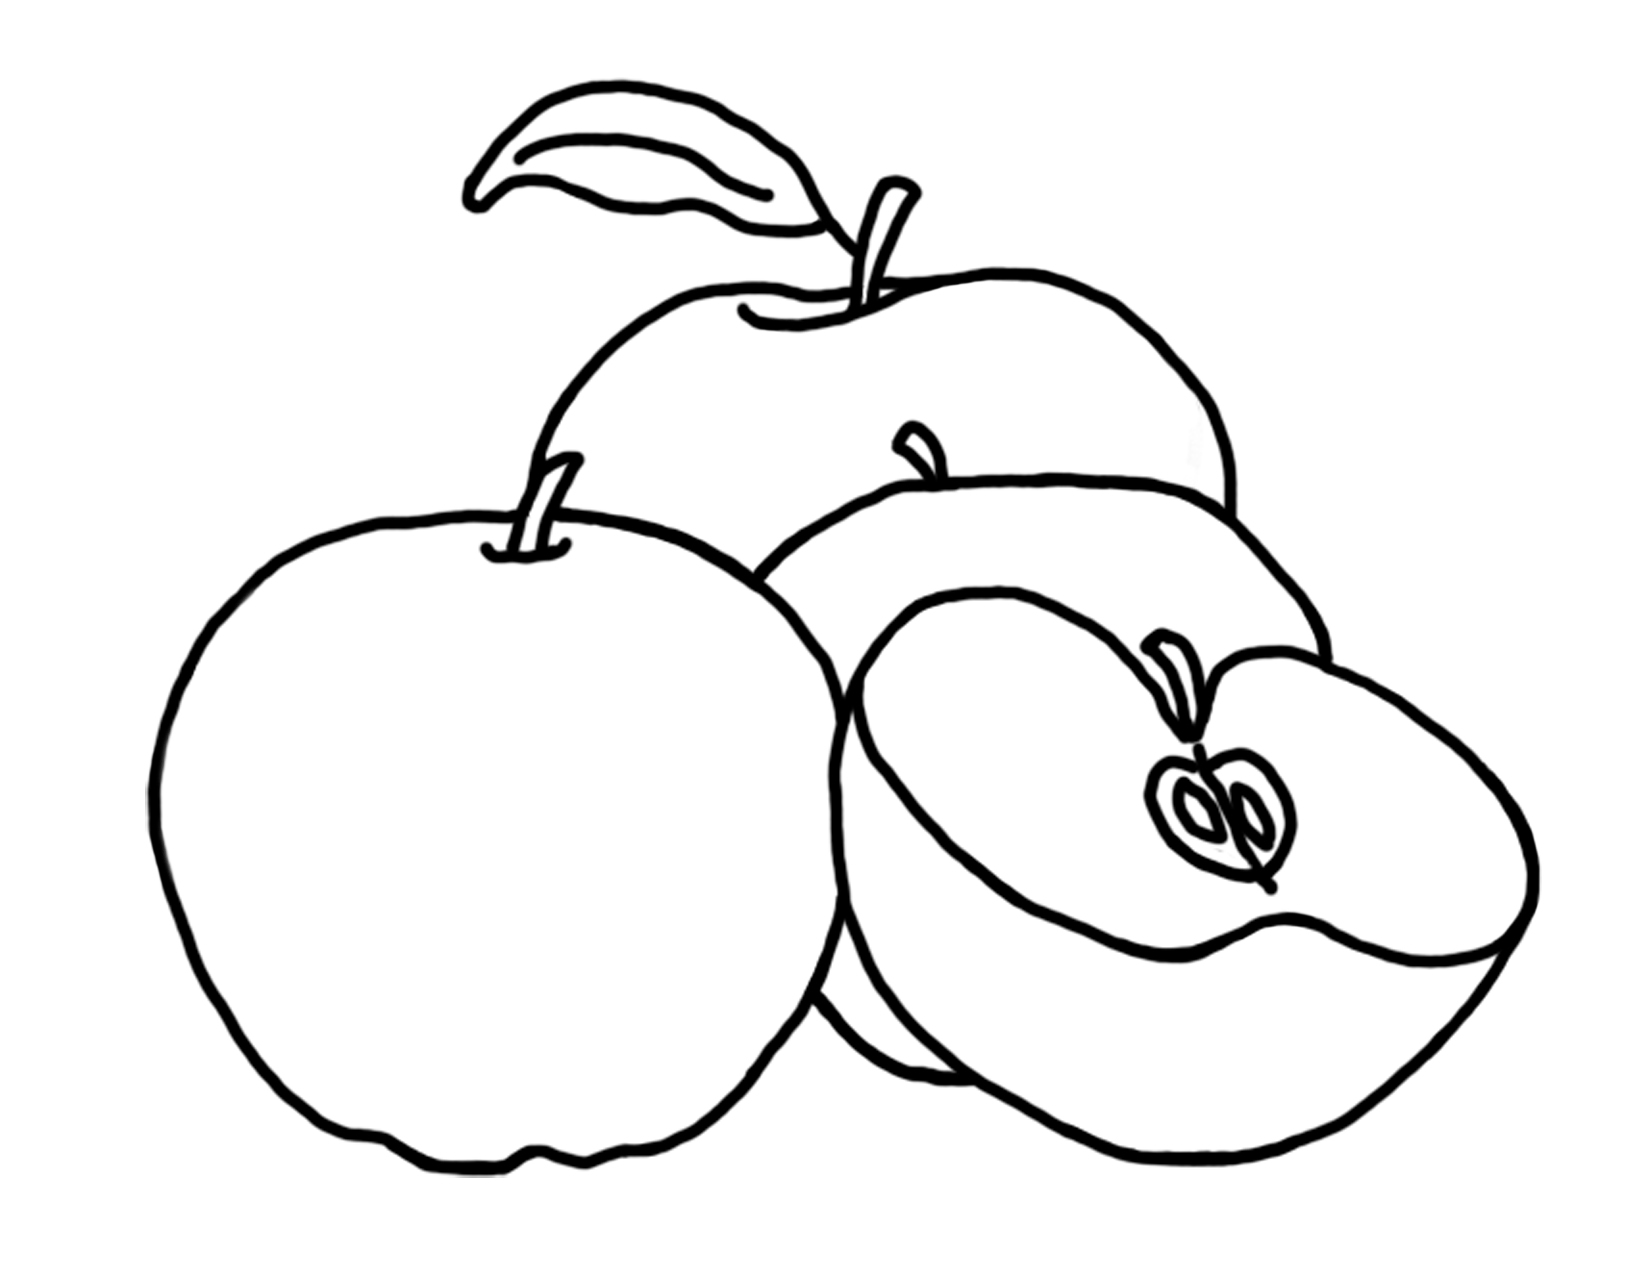 93 Top Coloring Page Of An Apple For Free